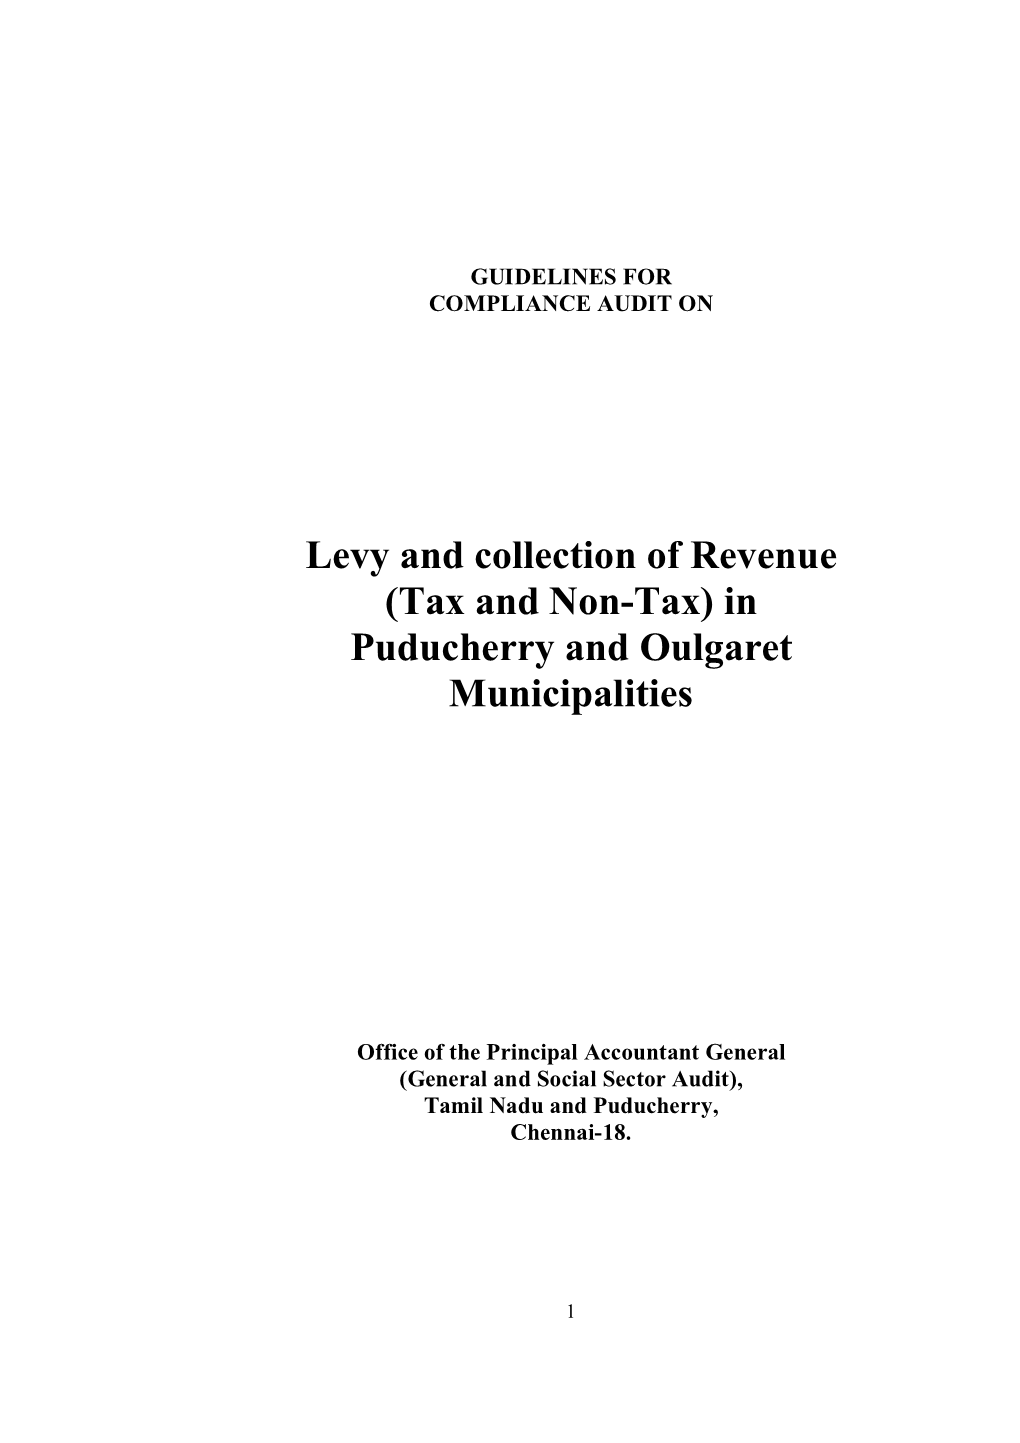 Levy and Collection of Revenue (Tax and Non-Tax) in Puducherry and Oulgaret Municipalities